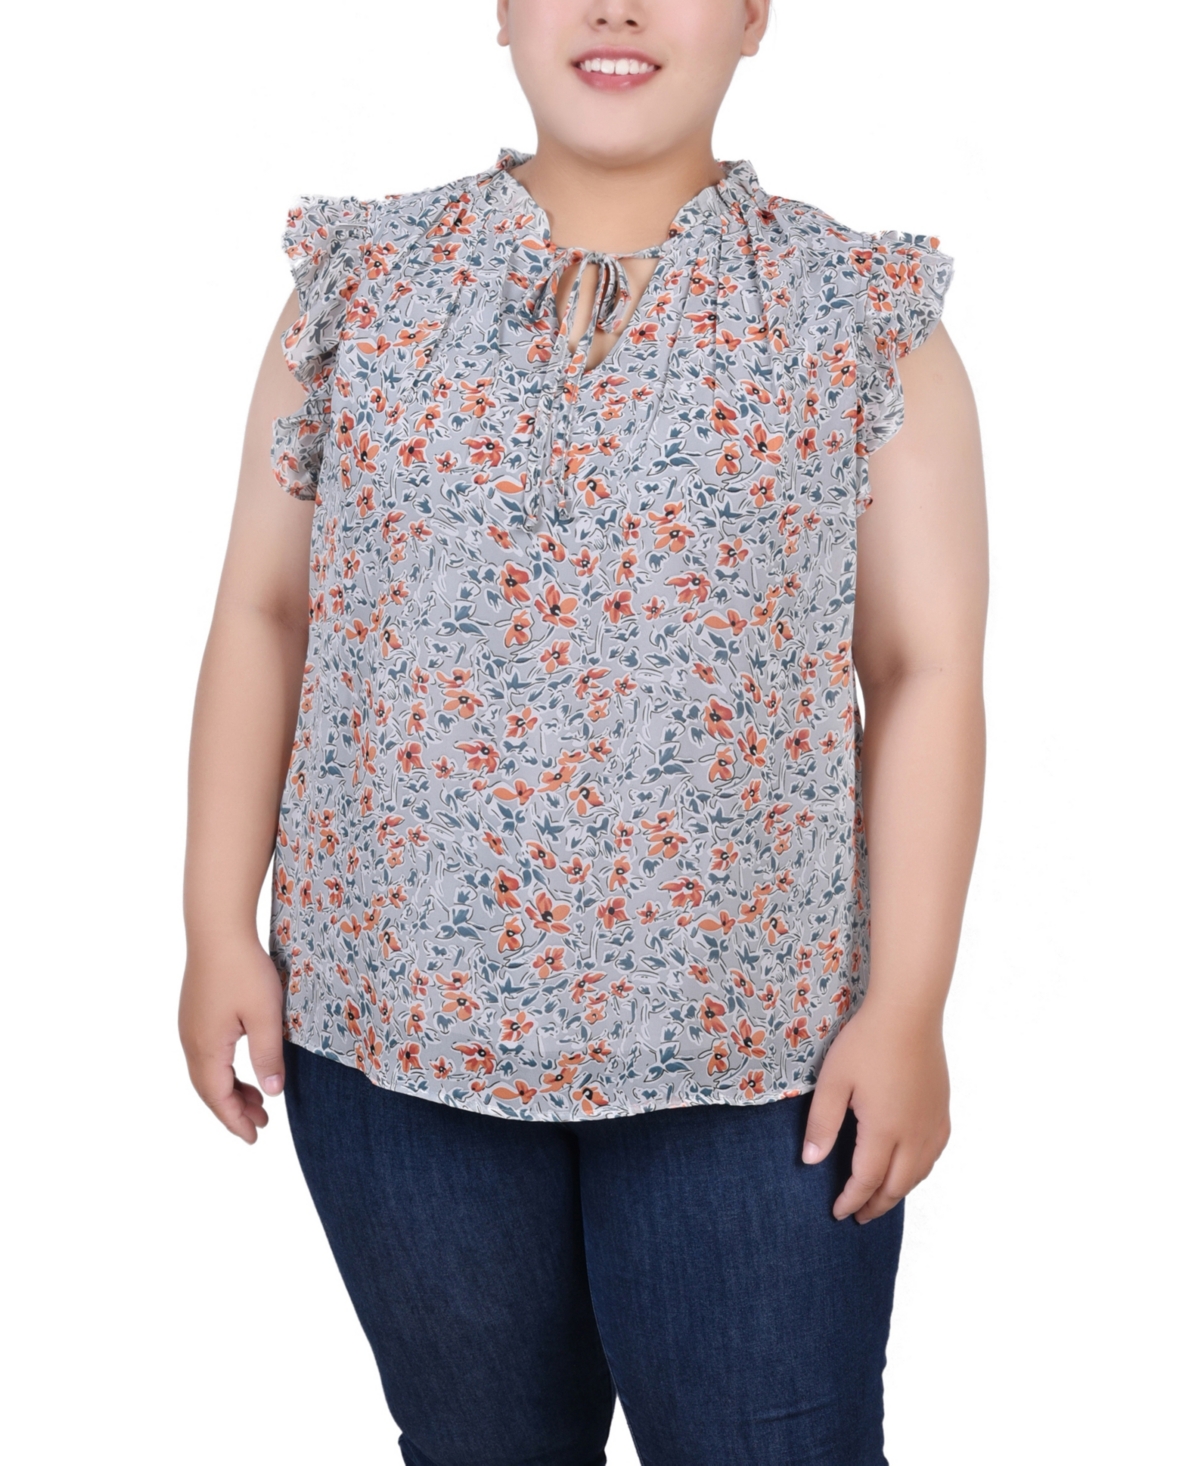 Ny Collection Petite Size Ruffled Sleeve Blouse With Tie Closure Top In Blue Green Orange Floral